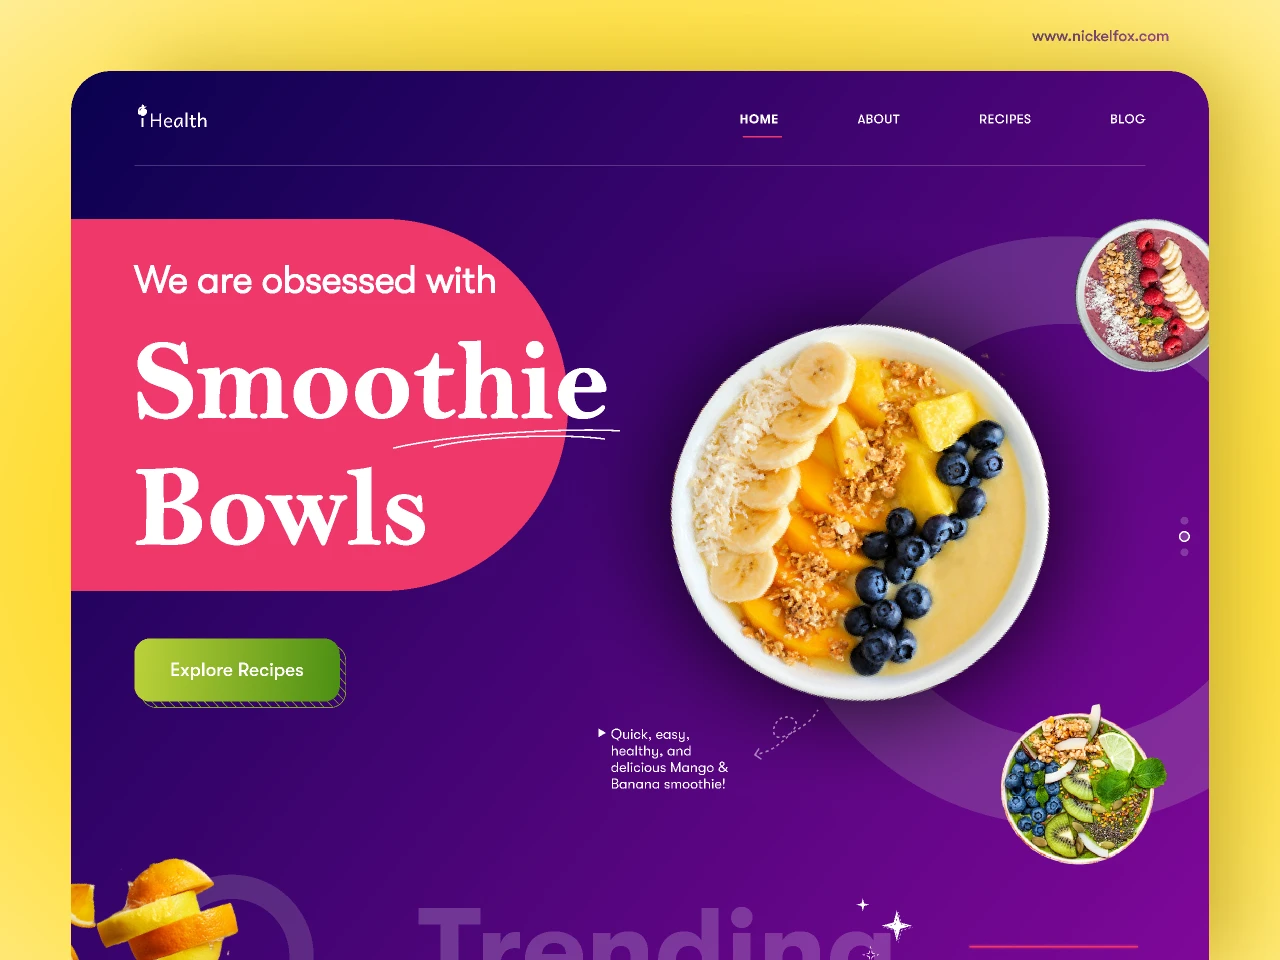 Smoothie Recipe Blog for Figma and Adobe XD